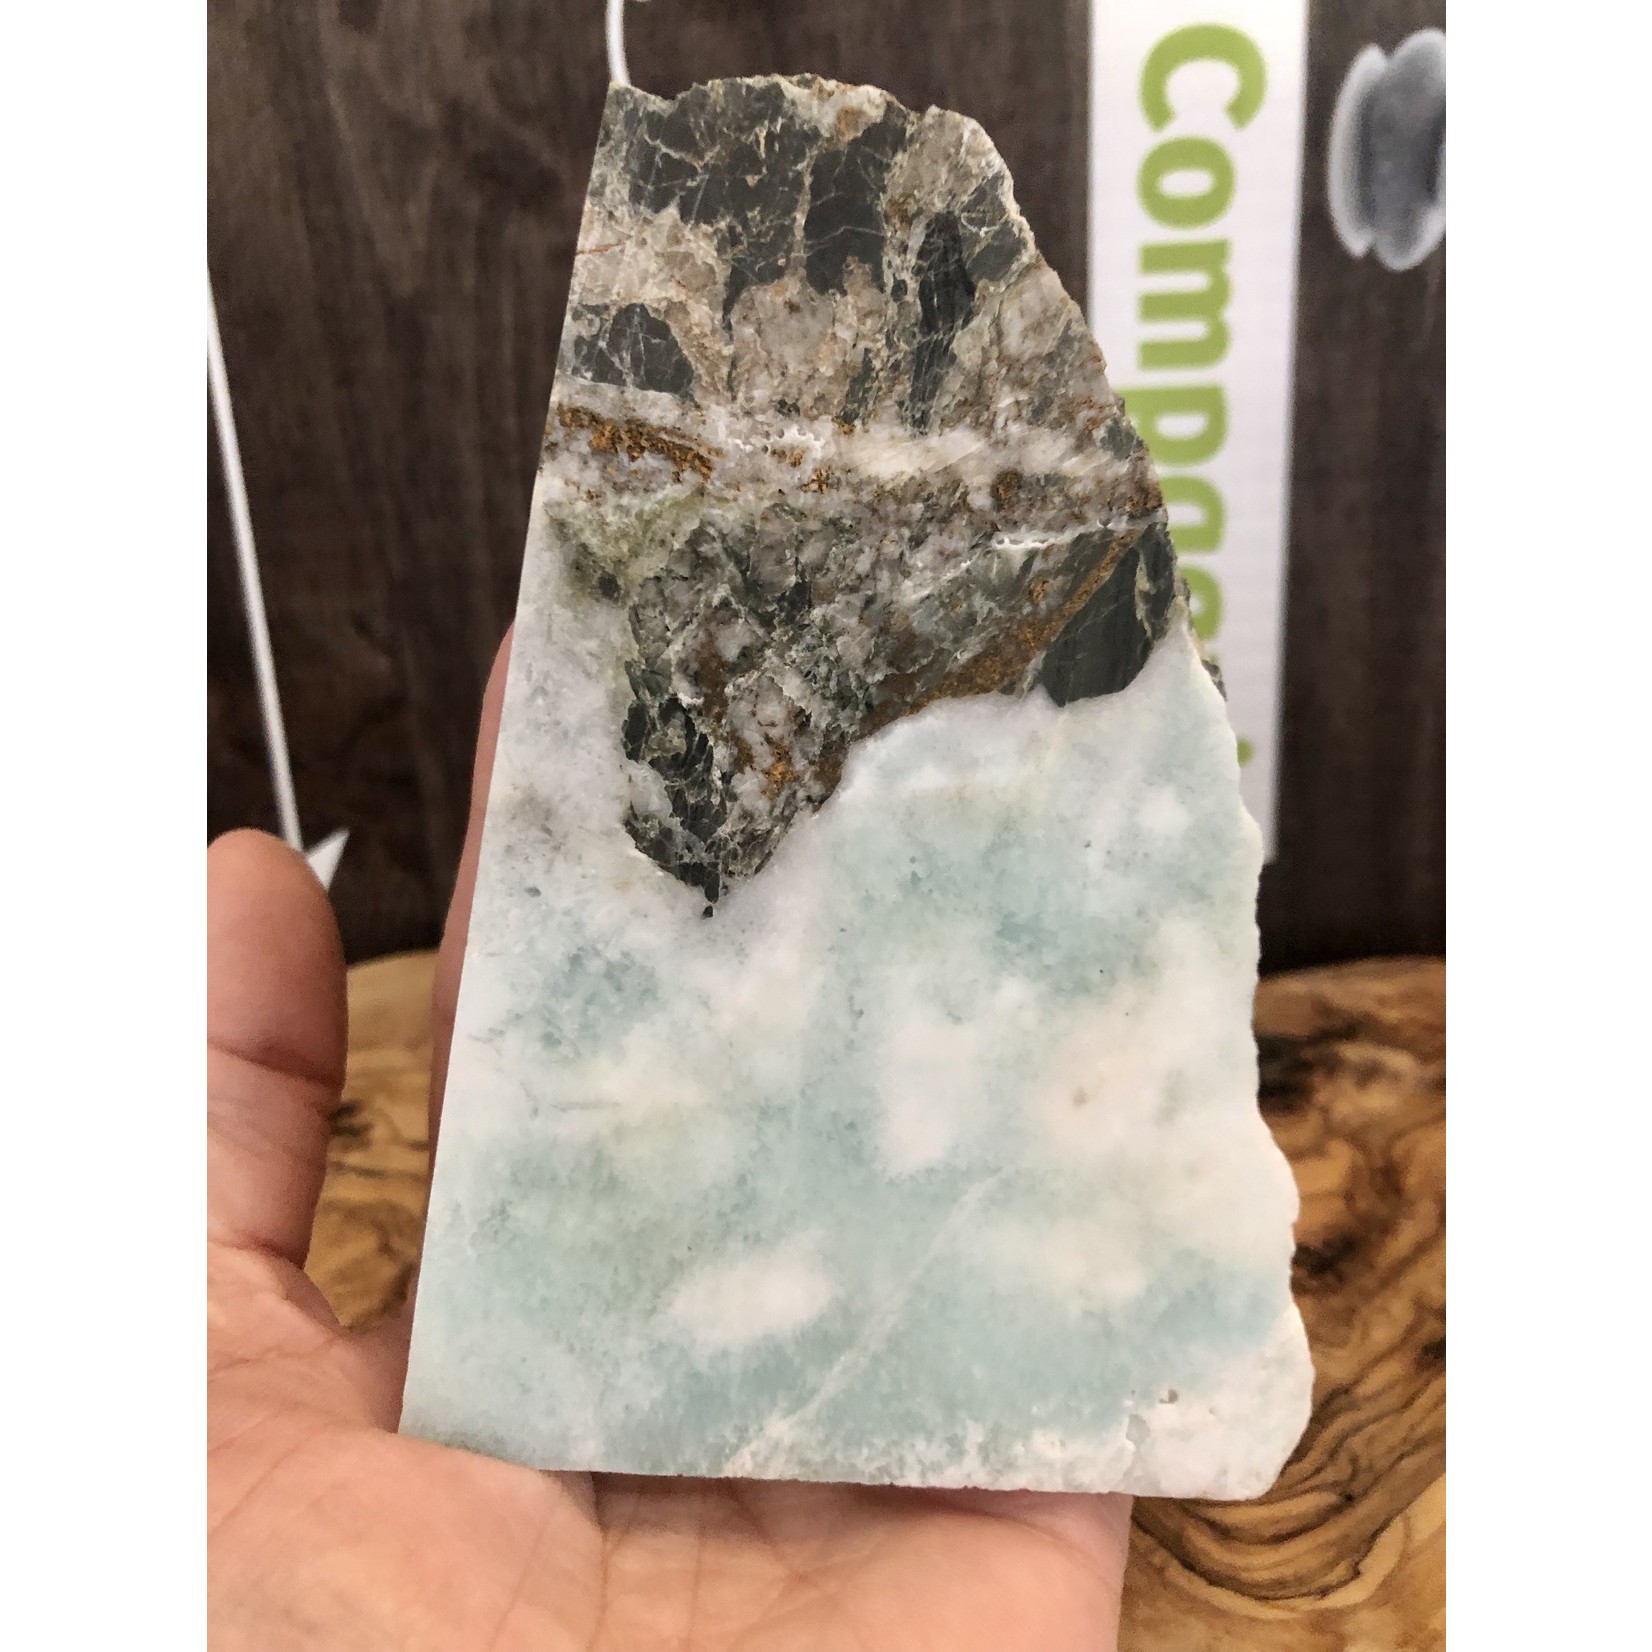 Luxurious Larimar Slab - Polished Gem of Harmony, Soothing Energies, Ideal Support for Menopause